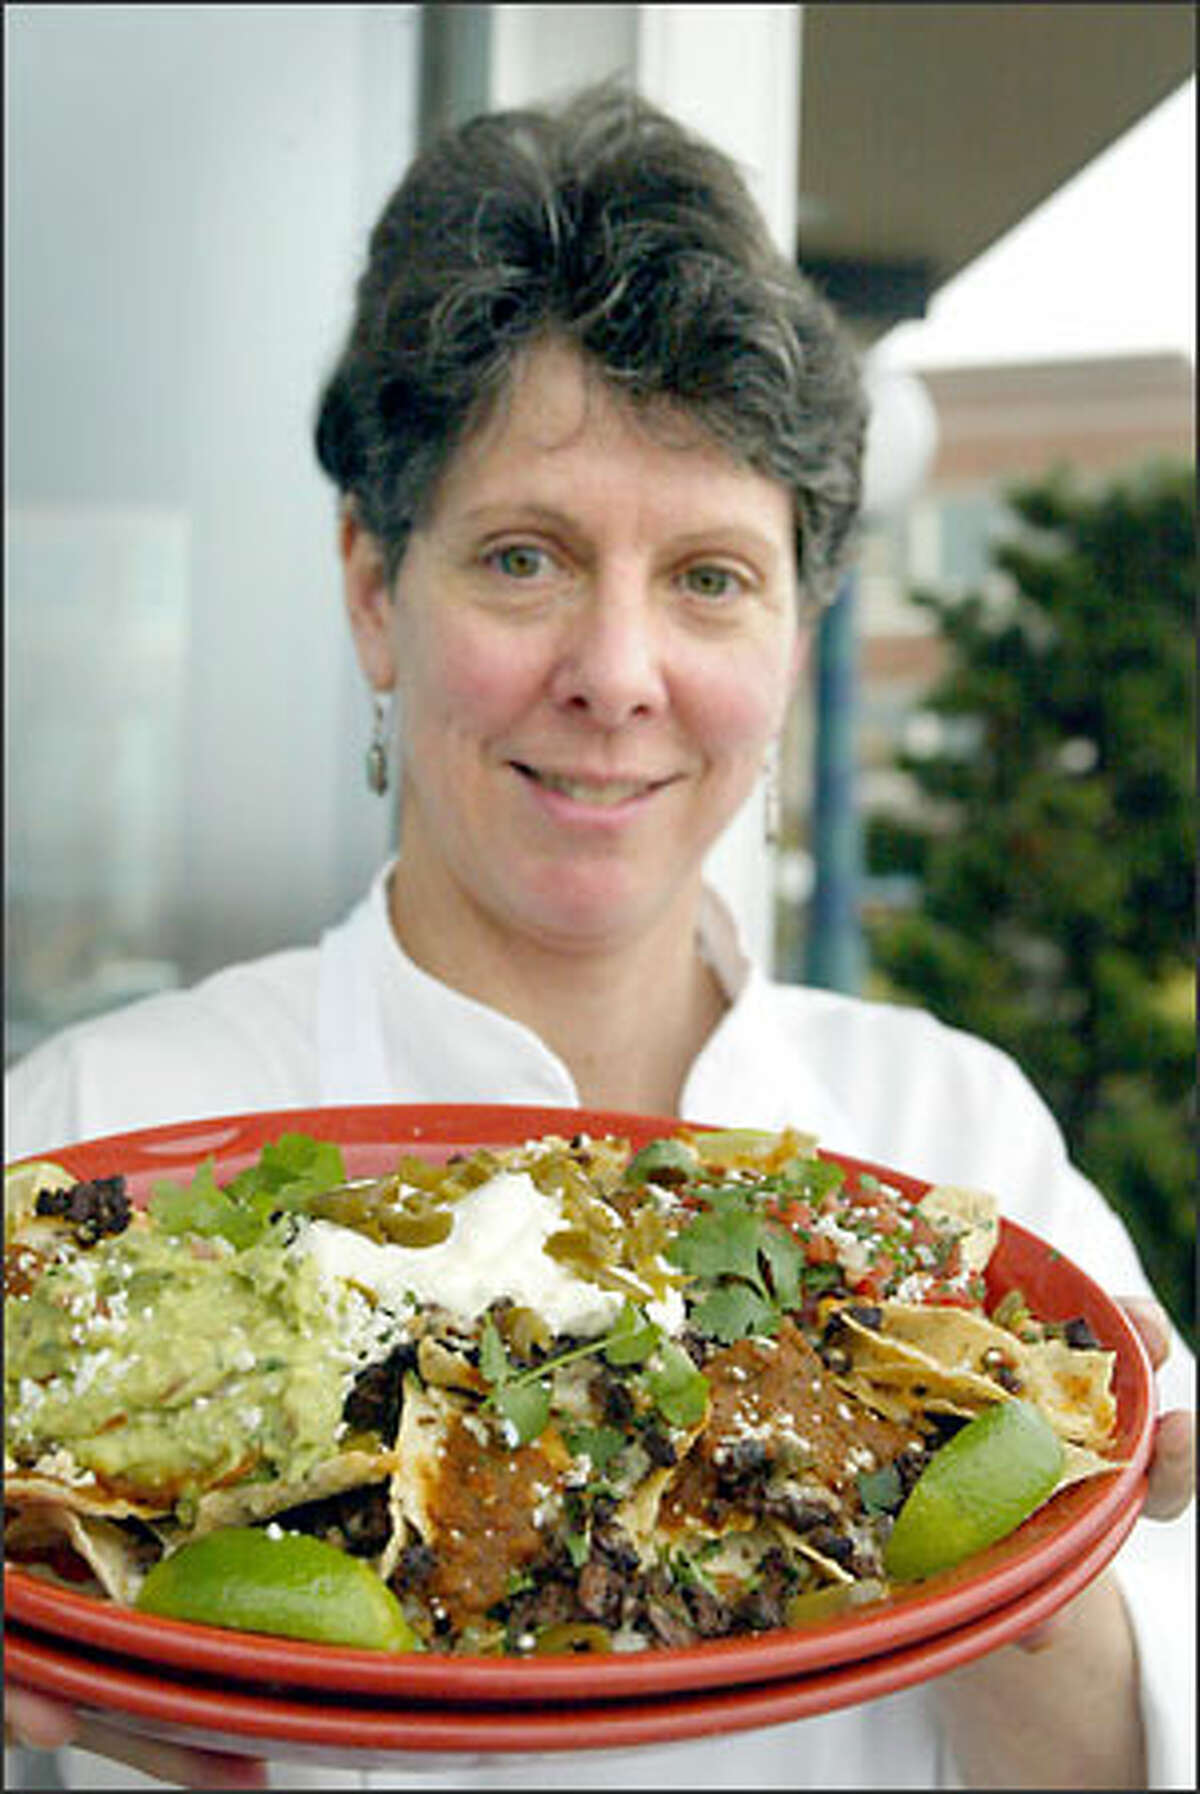 Yarrow Bay Grill's Vicky McCaffree scores a touchdown for East with her American Kobe Beef Nachos, served with sides of salsa, sour cream and guacamole.